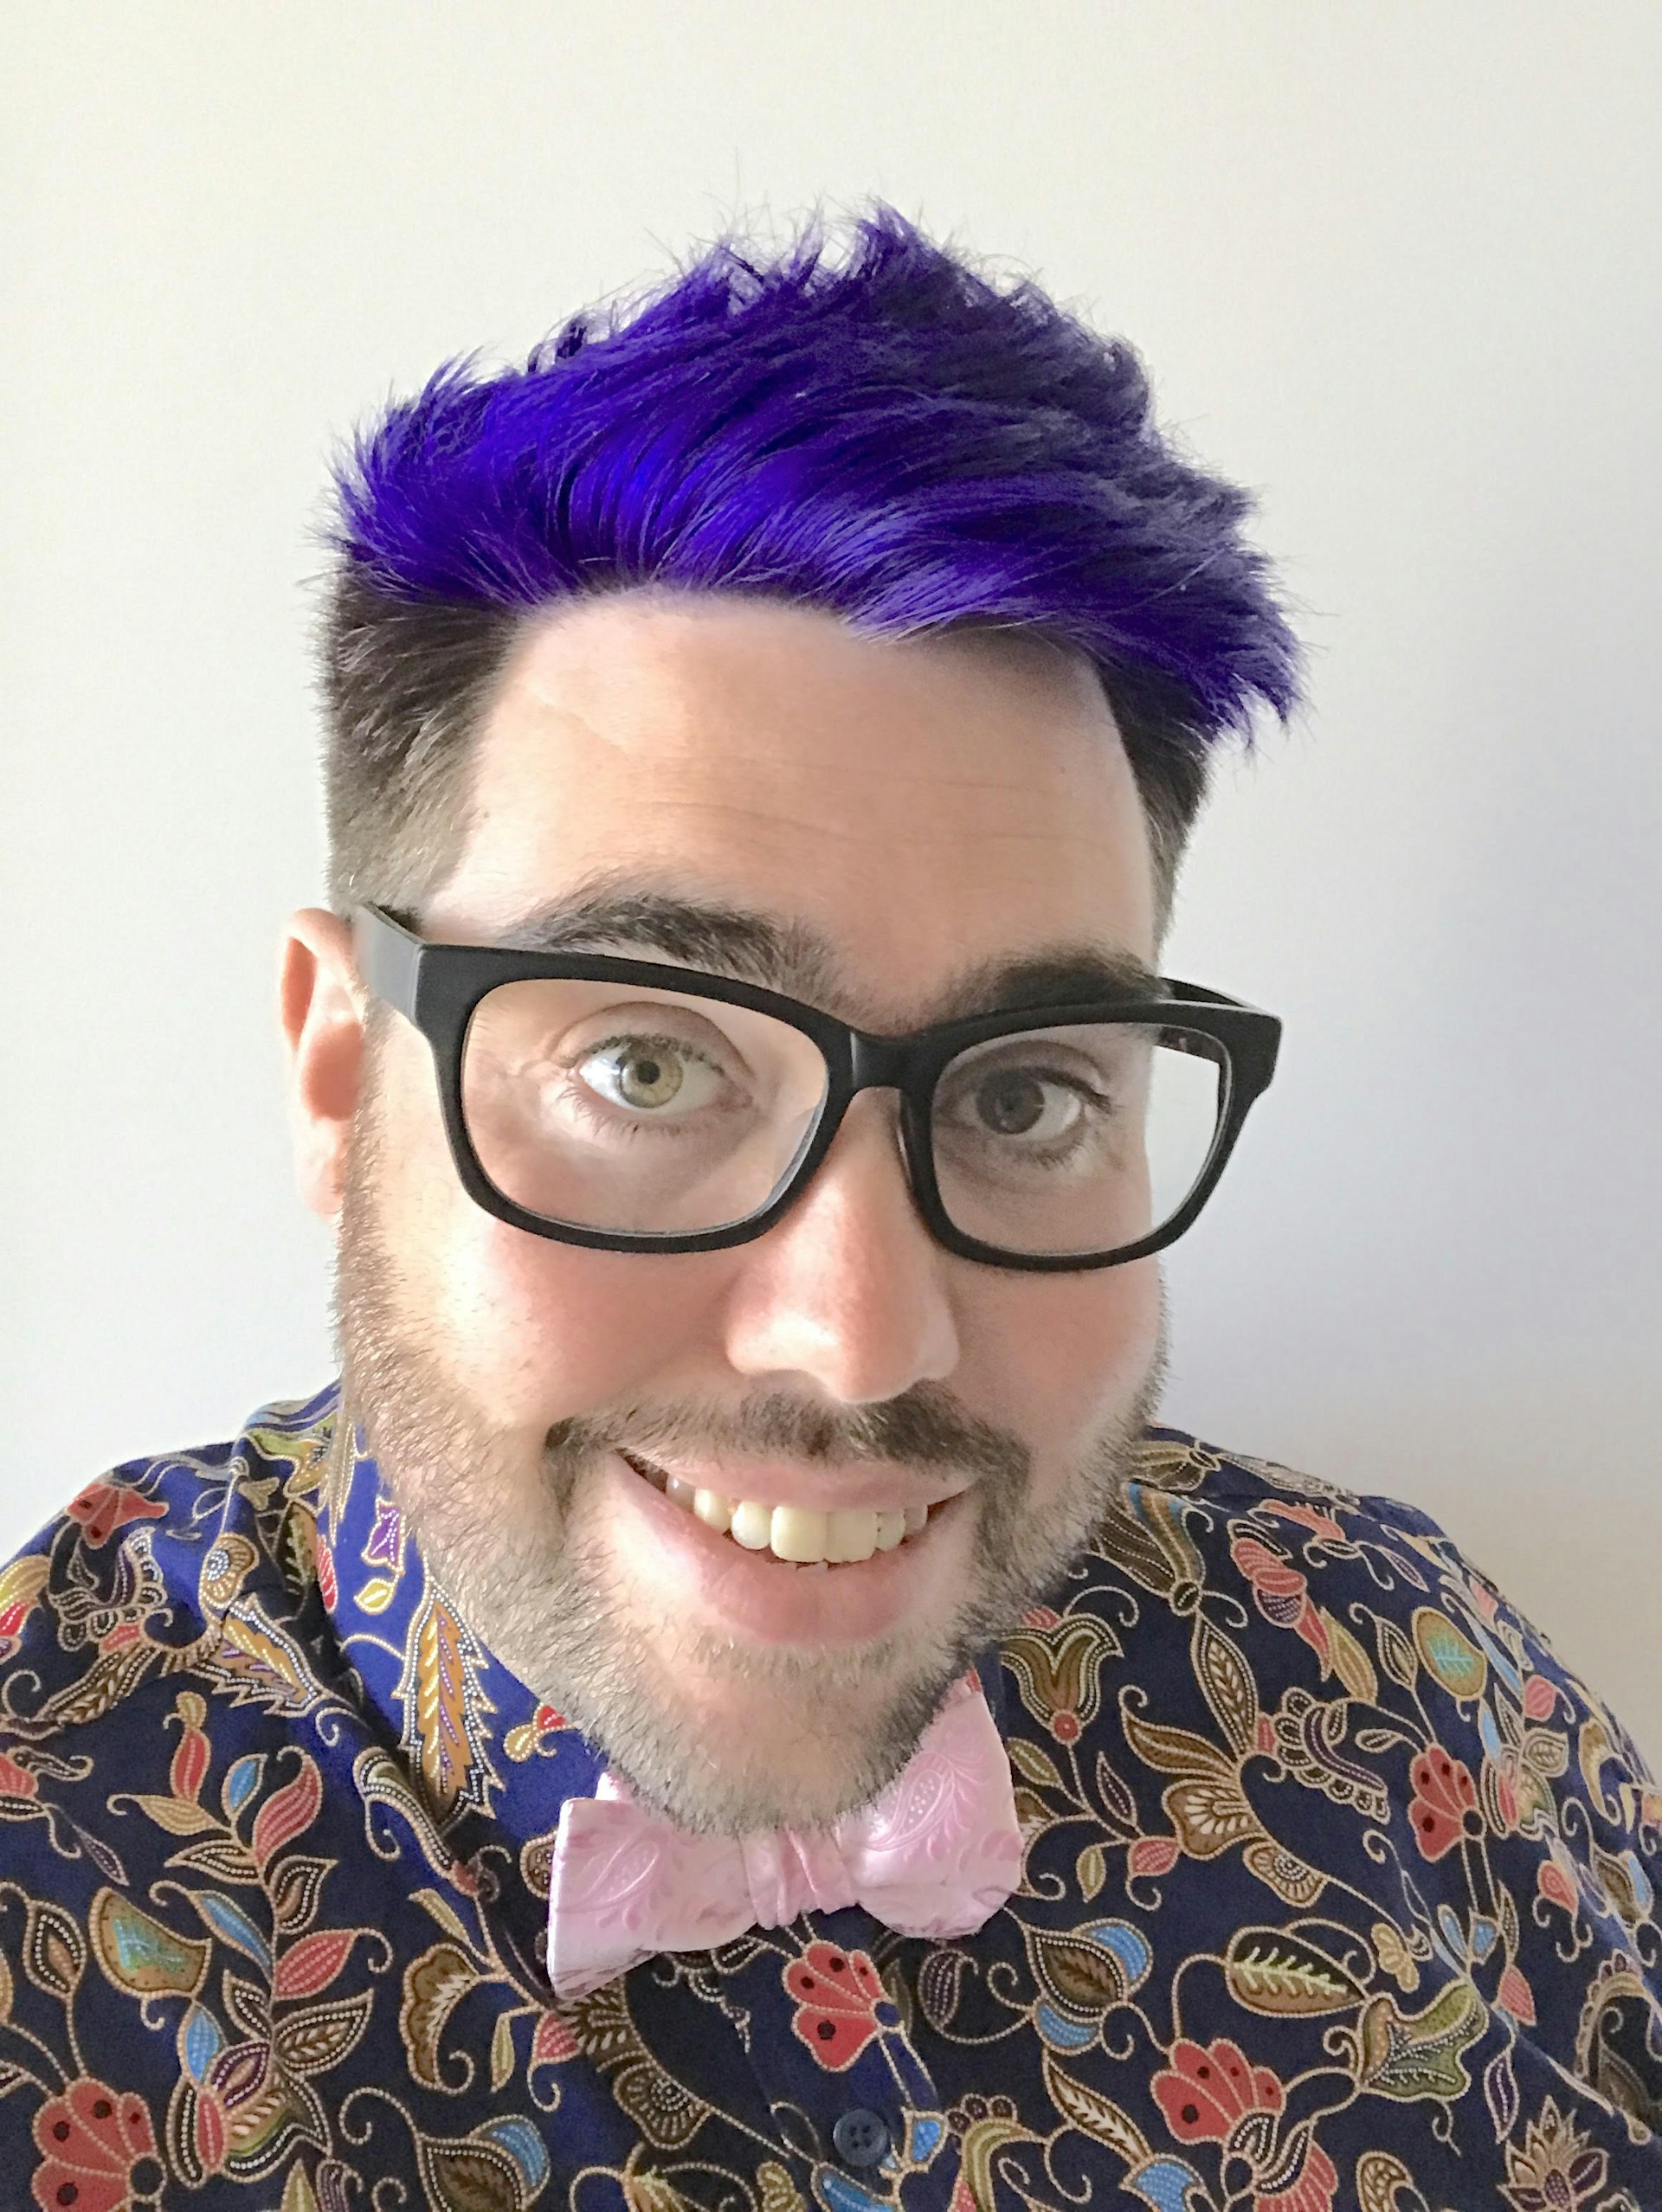 A headshot of a white man with purple hair. He's wearing a patterned shirt, pink bowtie and dark-rimmed glasses, and is smiling at the camera